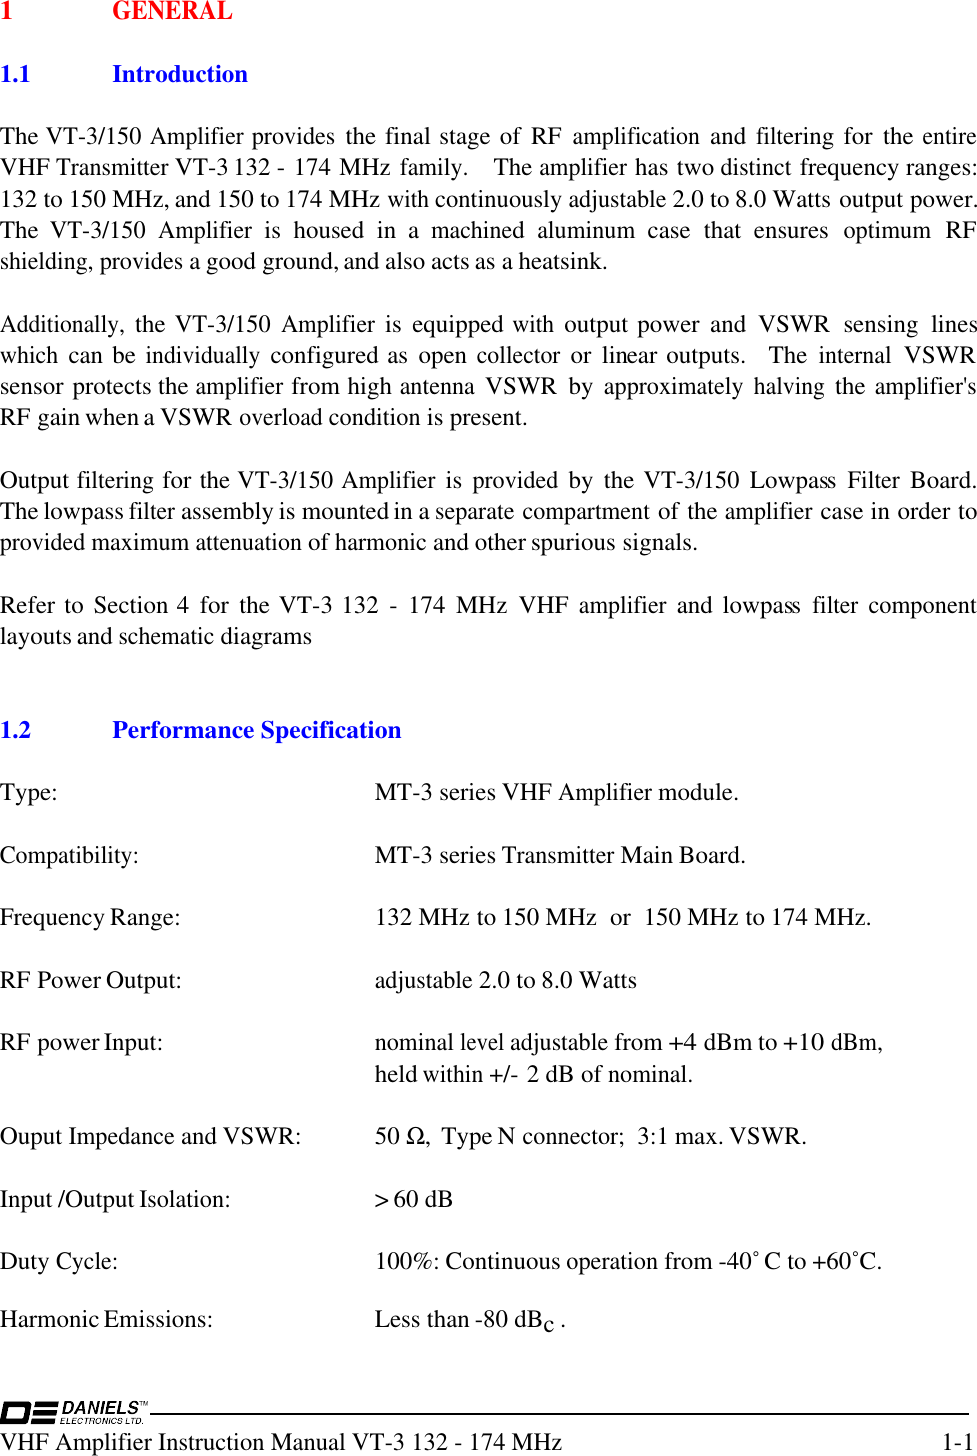 VHF Amplifier Instruction Manual VT-3 132 - 174 MHz1-11GENERAL1.1 IntroductionThe VT-3/150 Amplifier provides the final stage of  RF amplification and filtering for  the entireVHF Transmitter VT-3 132 - 174 MHz family.   The amplifier has two distinct frequency ranges:132 to 150 MHz, and 150 to 174 MHz with continuously adjustable 2.0 to 8.0 Watts output power.The VT-3/150 Amplifier is  housed  in  a machined aluminum case  that  ensures optimum RFshielding, provides a good ground, and also acts as a heatsink.Additionally, the VT-3/150 Amplifier is  equipped with output power  and  VSWR  sensing  lineswhich can be individually configured as  open collector or  linear outputs.   The internal VSWRsensor protects the amplifier from high antenna VSWR  by approximately halving the amplifier&apos;sRF gain when a VSWR overload condition is present.Output filtering for the VT-3/150 Amplifier is provided by  the VT-3/150 Lowpass Filter Board.The lowpass filter assembly is mounted in a separate compartment of the amplifier case in order toprovided maximum attenuation of harmonic and other spurious signals.Refer to Section 4  for  the VT-3 132  -  174  MHz  VHF amplifier and lowpass filter componentlayouts and schematic diagrams1.2Performance SpecificationType: MT-3 series VHF Amplifier module.Compatibility:MT-3 series Transmitter Main Board.Frequency Range: 132 MHz to 150 MHz  or  150 MHz to 174 MHz.RF Power Output:adjustable 2.0 to 8.0 WattsRF power Input:nominal level adjustable from +4 dBm to +10 dBm,held within +/- 2 dB of nominal.Ouput Impedance and VSWR: 50 Ω,  Type N connector;  3:1 max. VSWR.Input /Output Isolation:&gt; 60 dBDuty Cycle:100%: Continuous operation from -40˚ C to +60˚C.Harmonic Emissions: Less than -80 dBc .